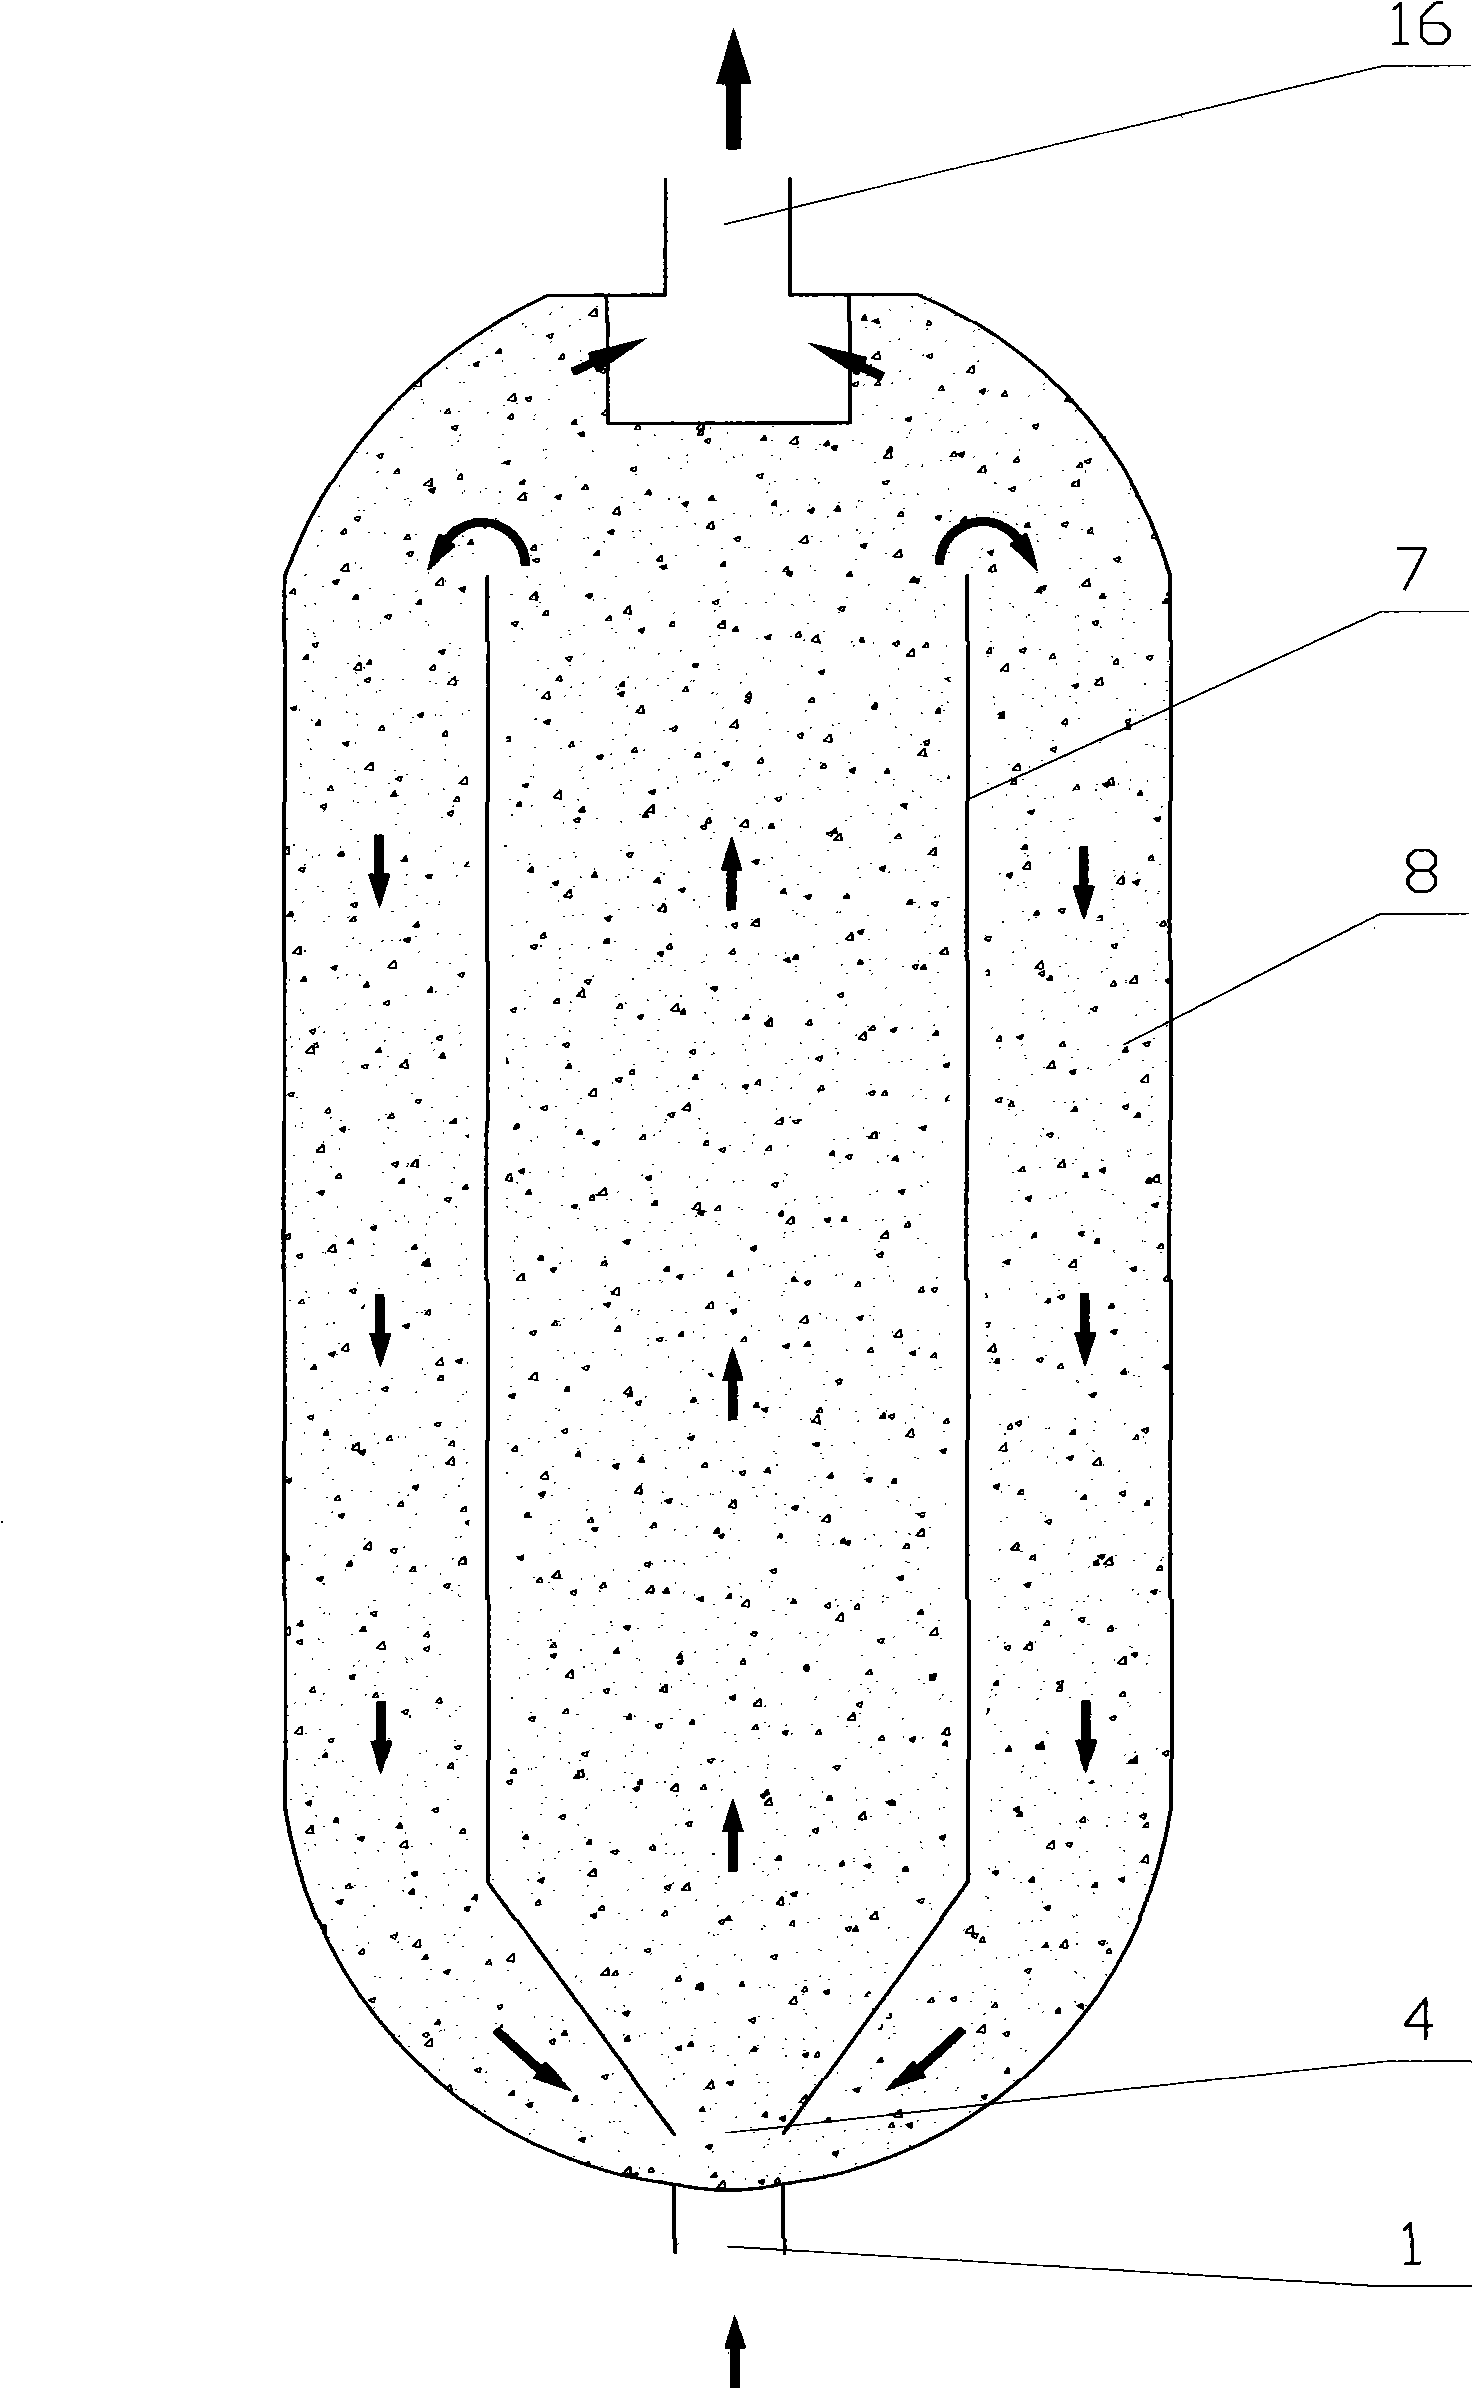 Water treatment unit with dynamic state material